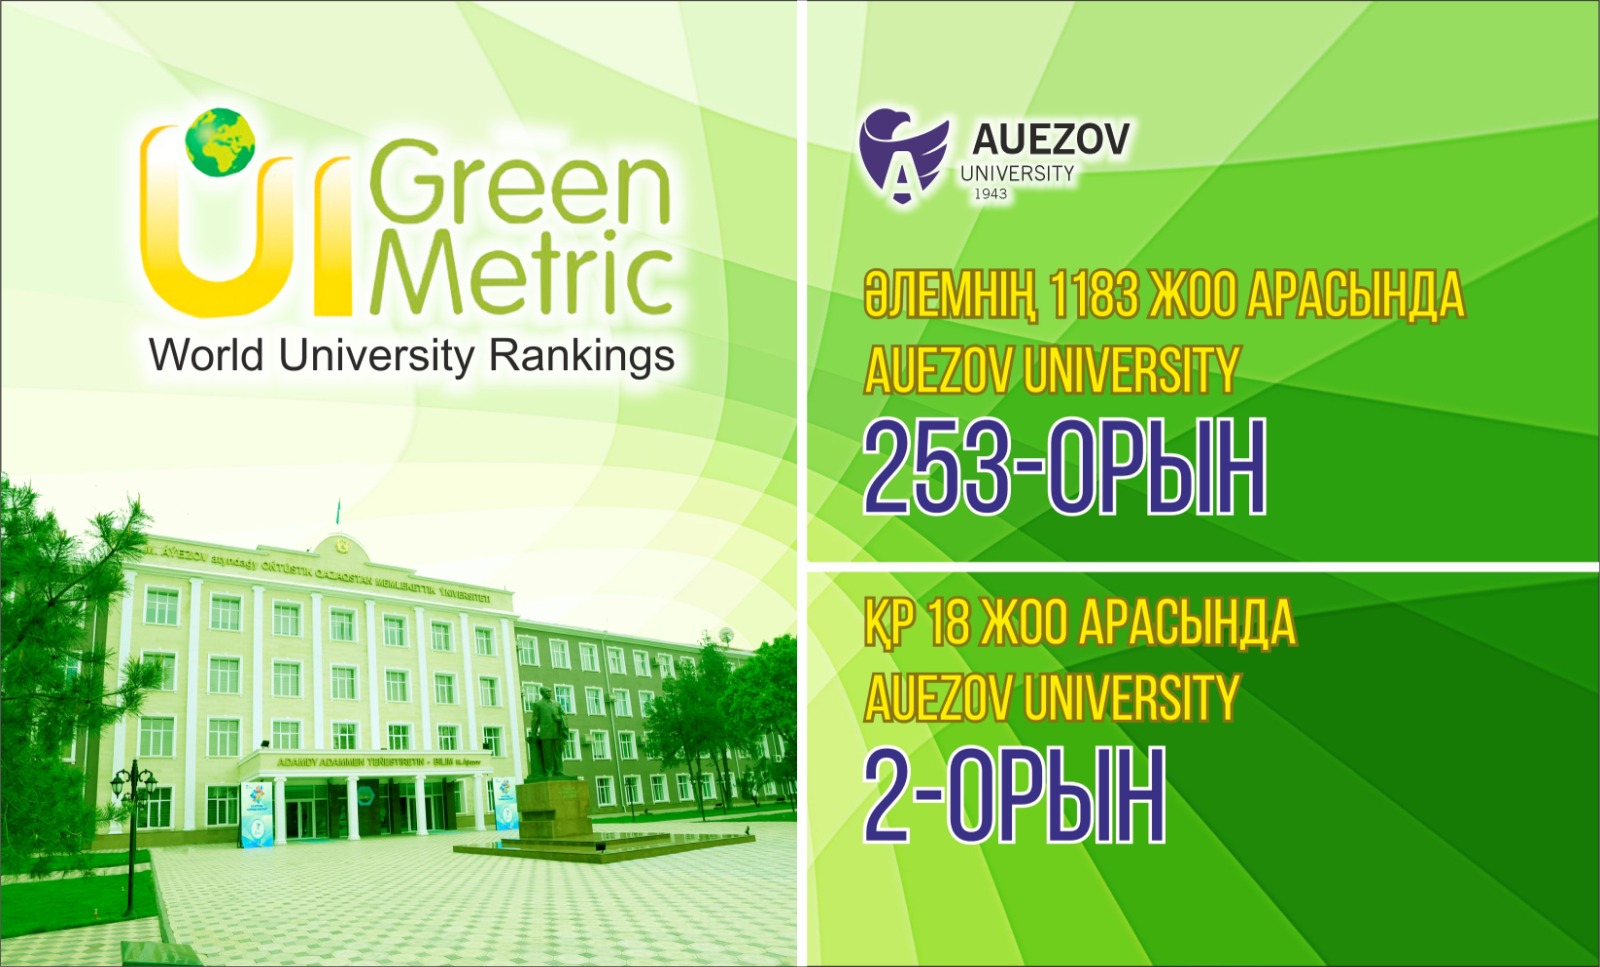 UI GREENMETRIC WORLD UNIVERSITY RANKINGS 2023 RESULTS PUBLISHED